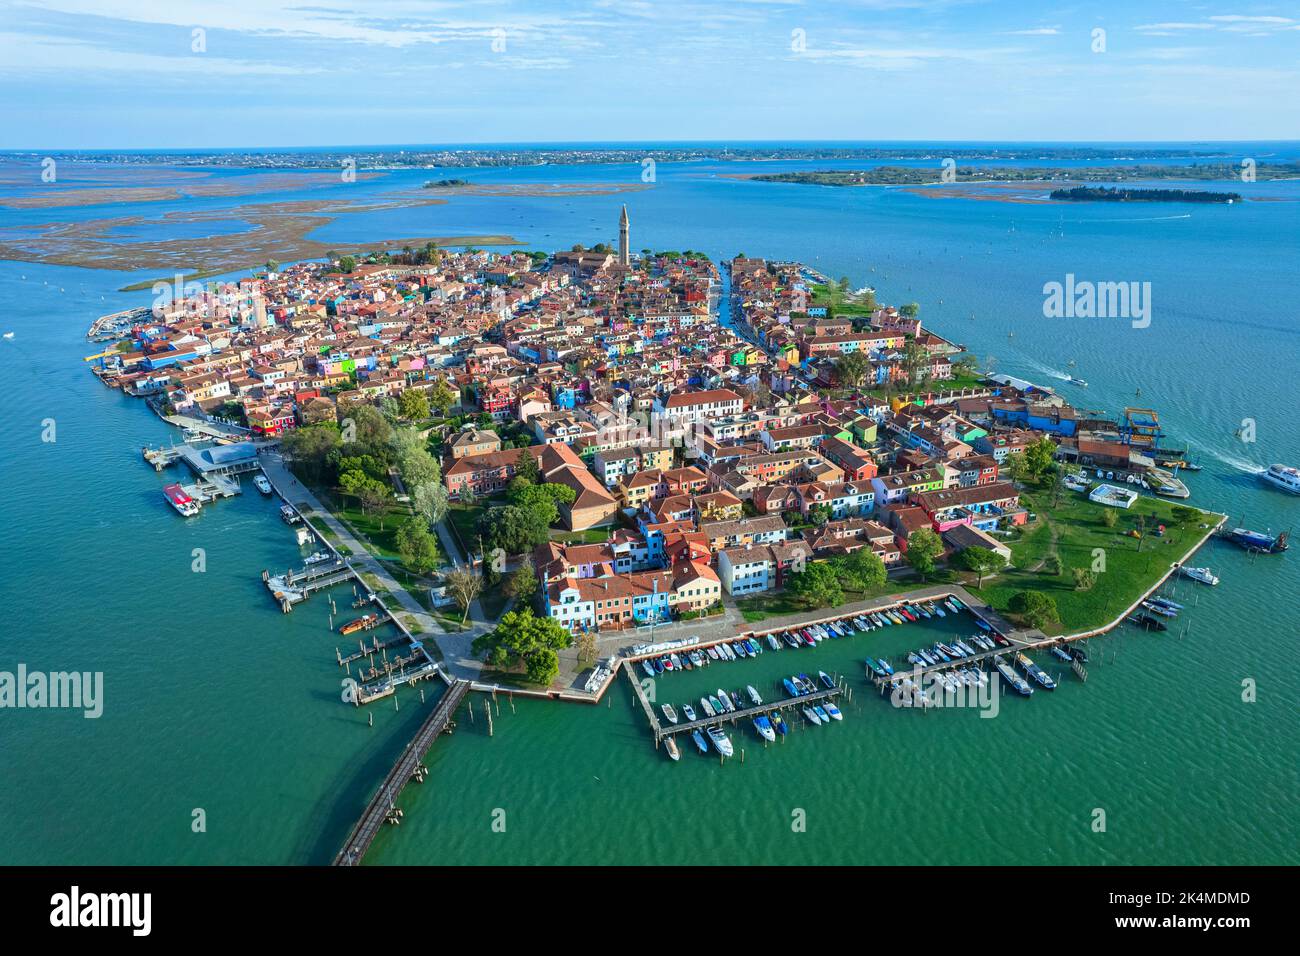 Aerial view of the island of Burano. Burano is one of the islands of Venice, famous for its colorful houses. Burano, Venice - October 2022 Stock Photo